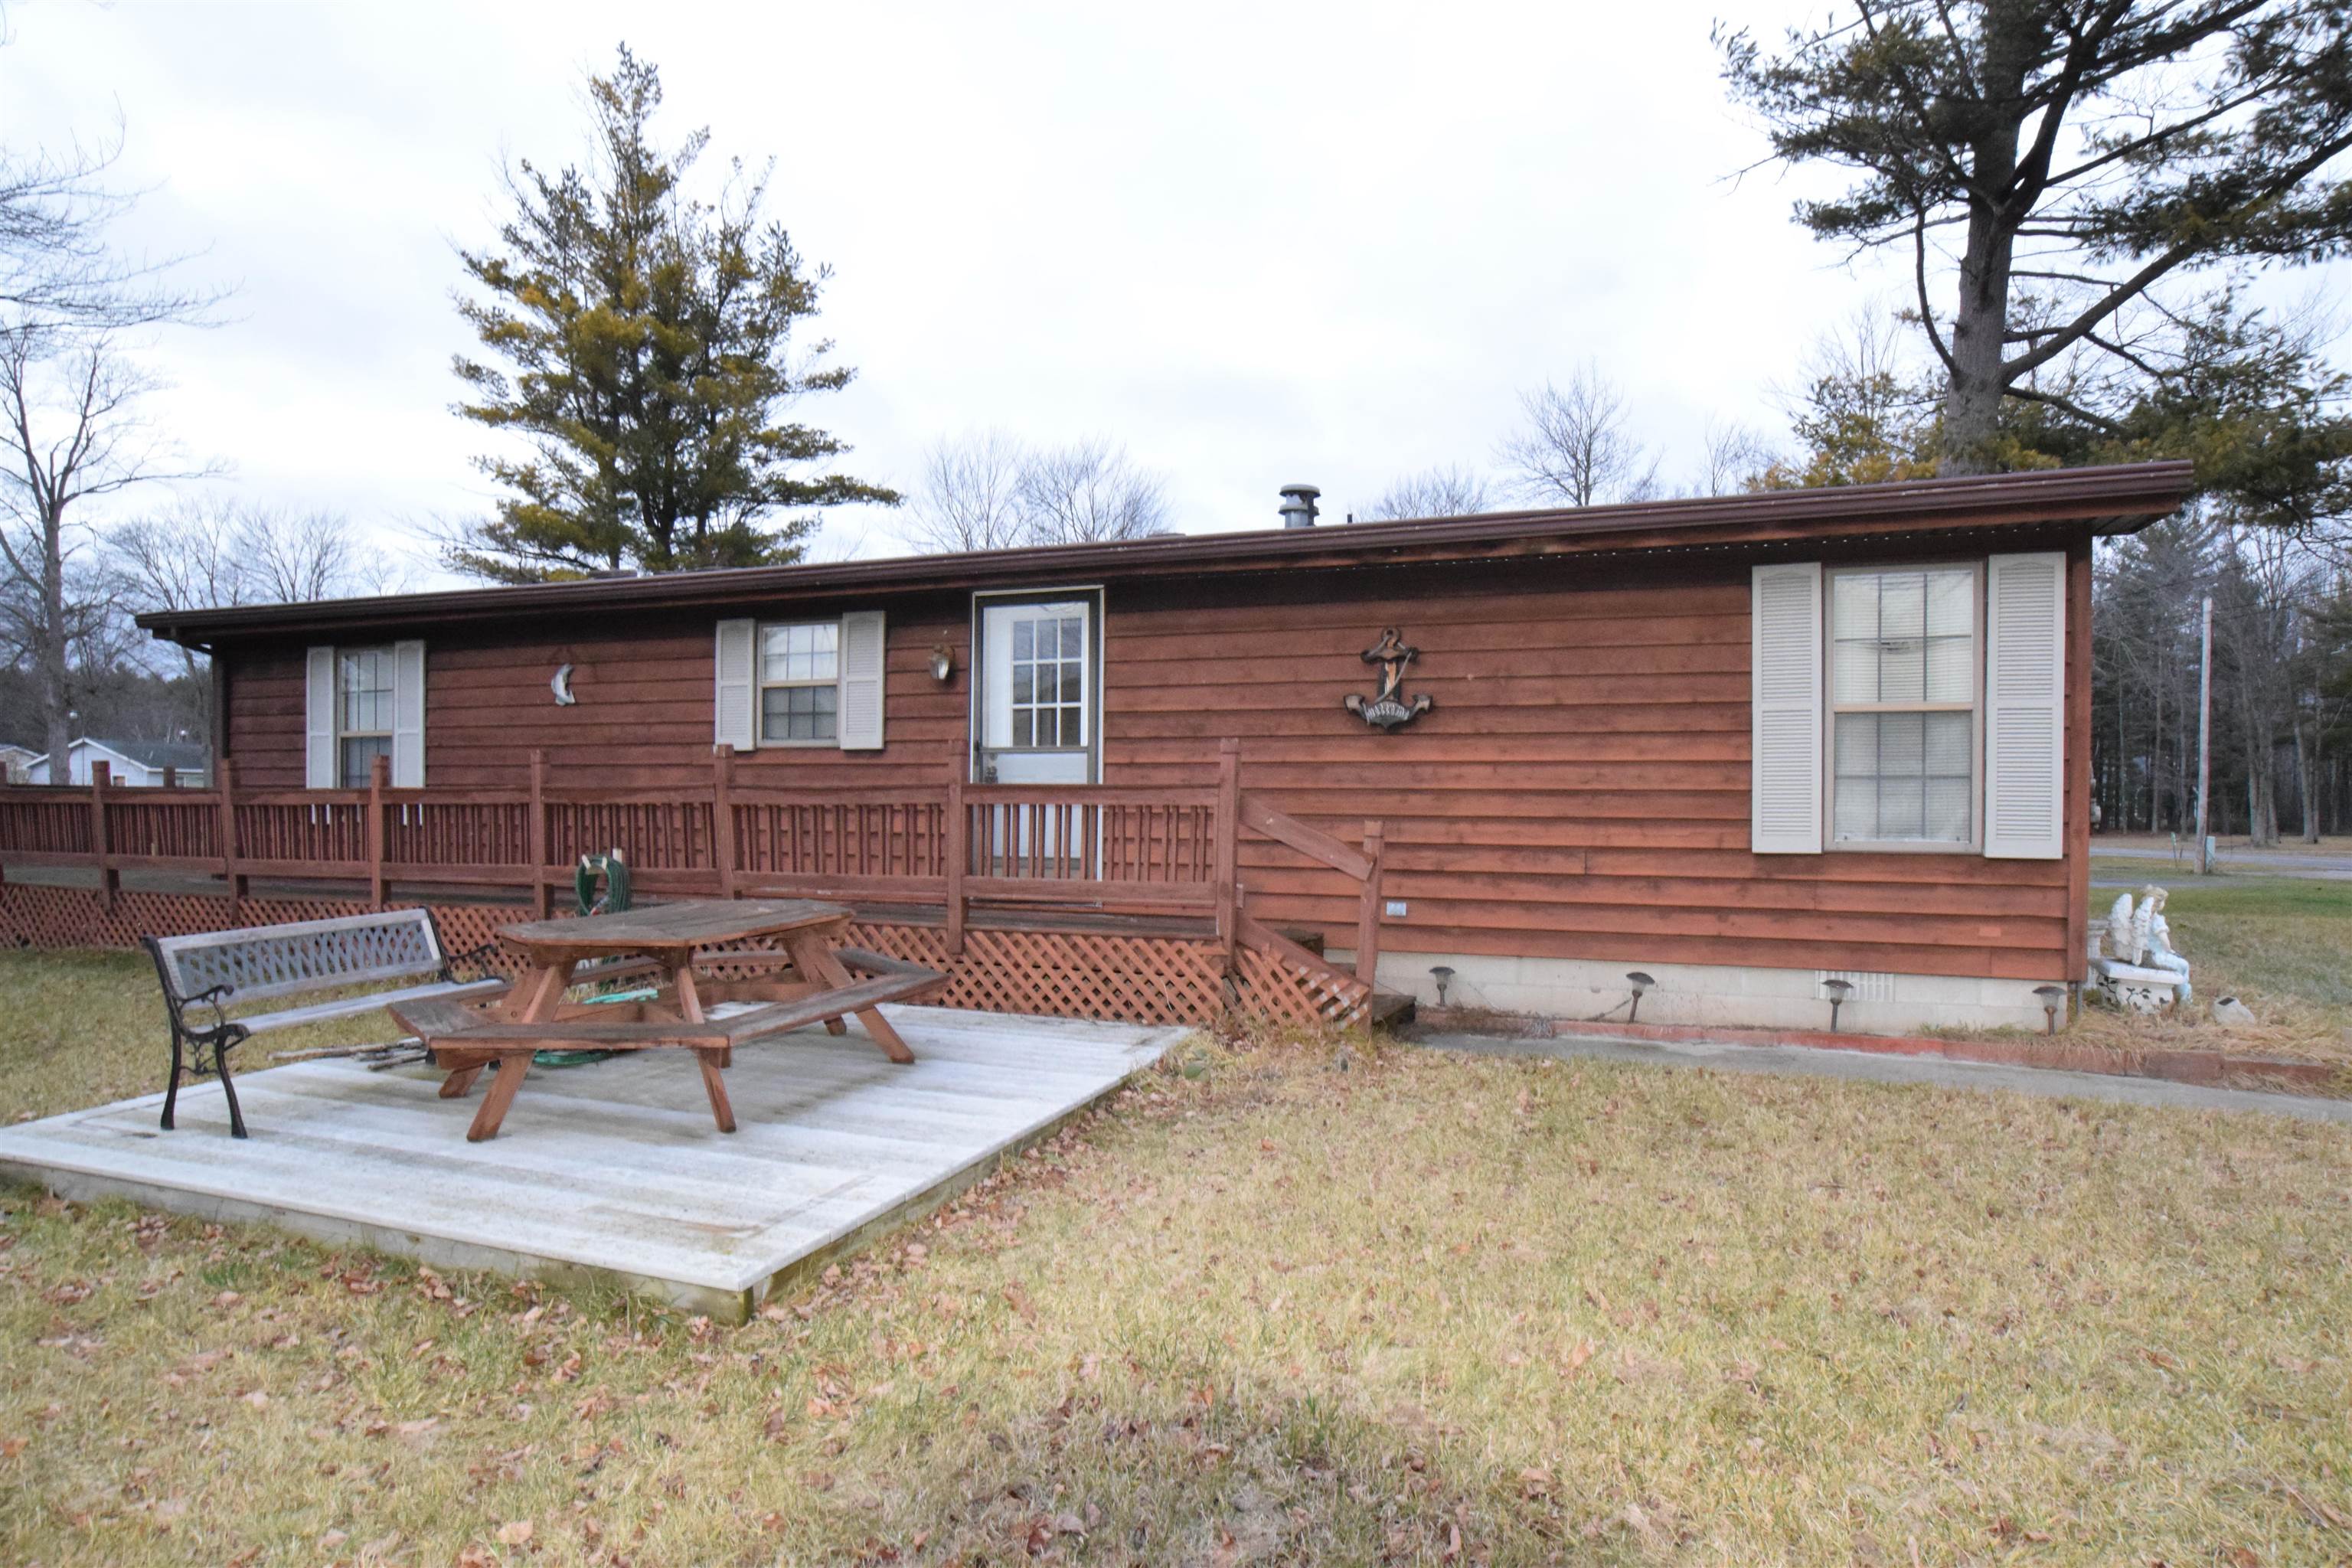 Perfect for a cottage or just a nice country home this 3 bedroom ranch is waiting for you to call it your own.